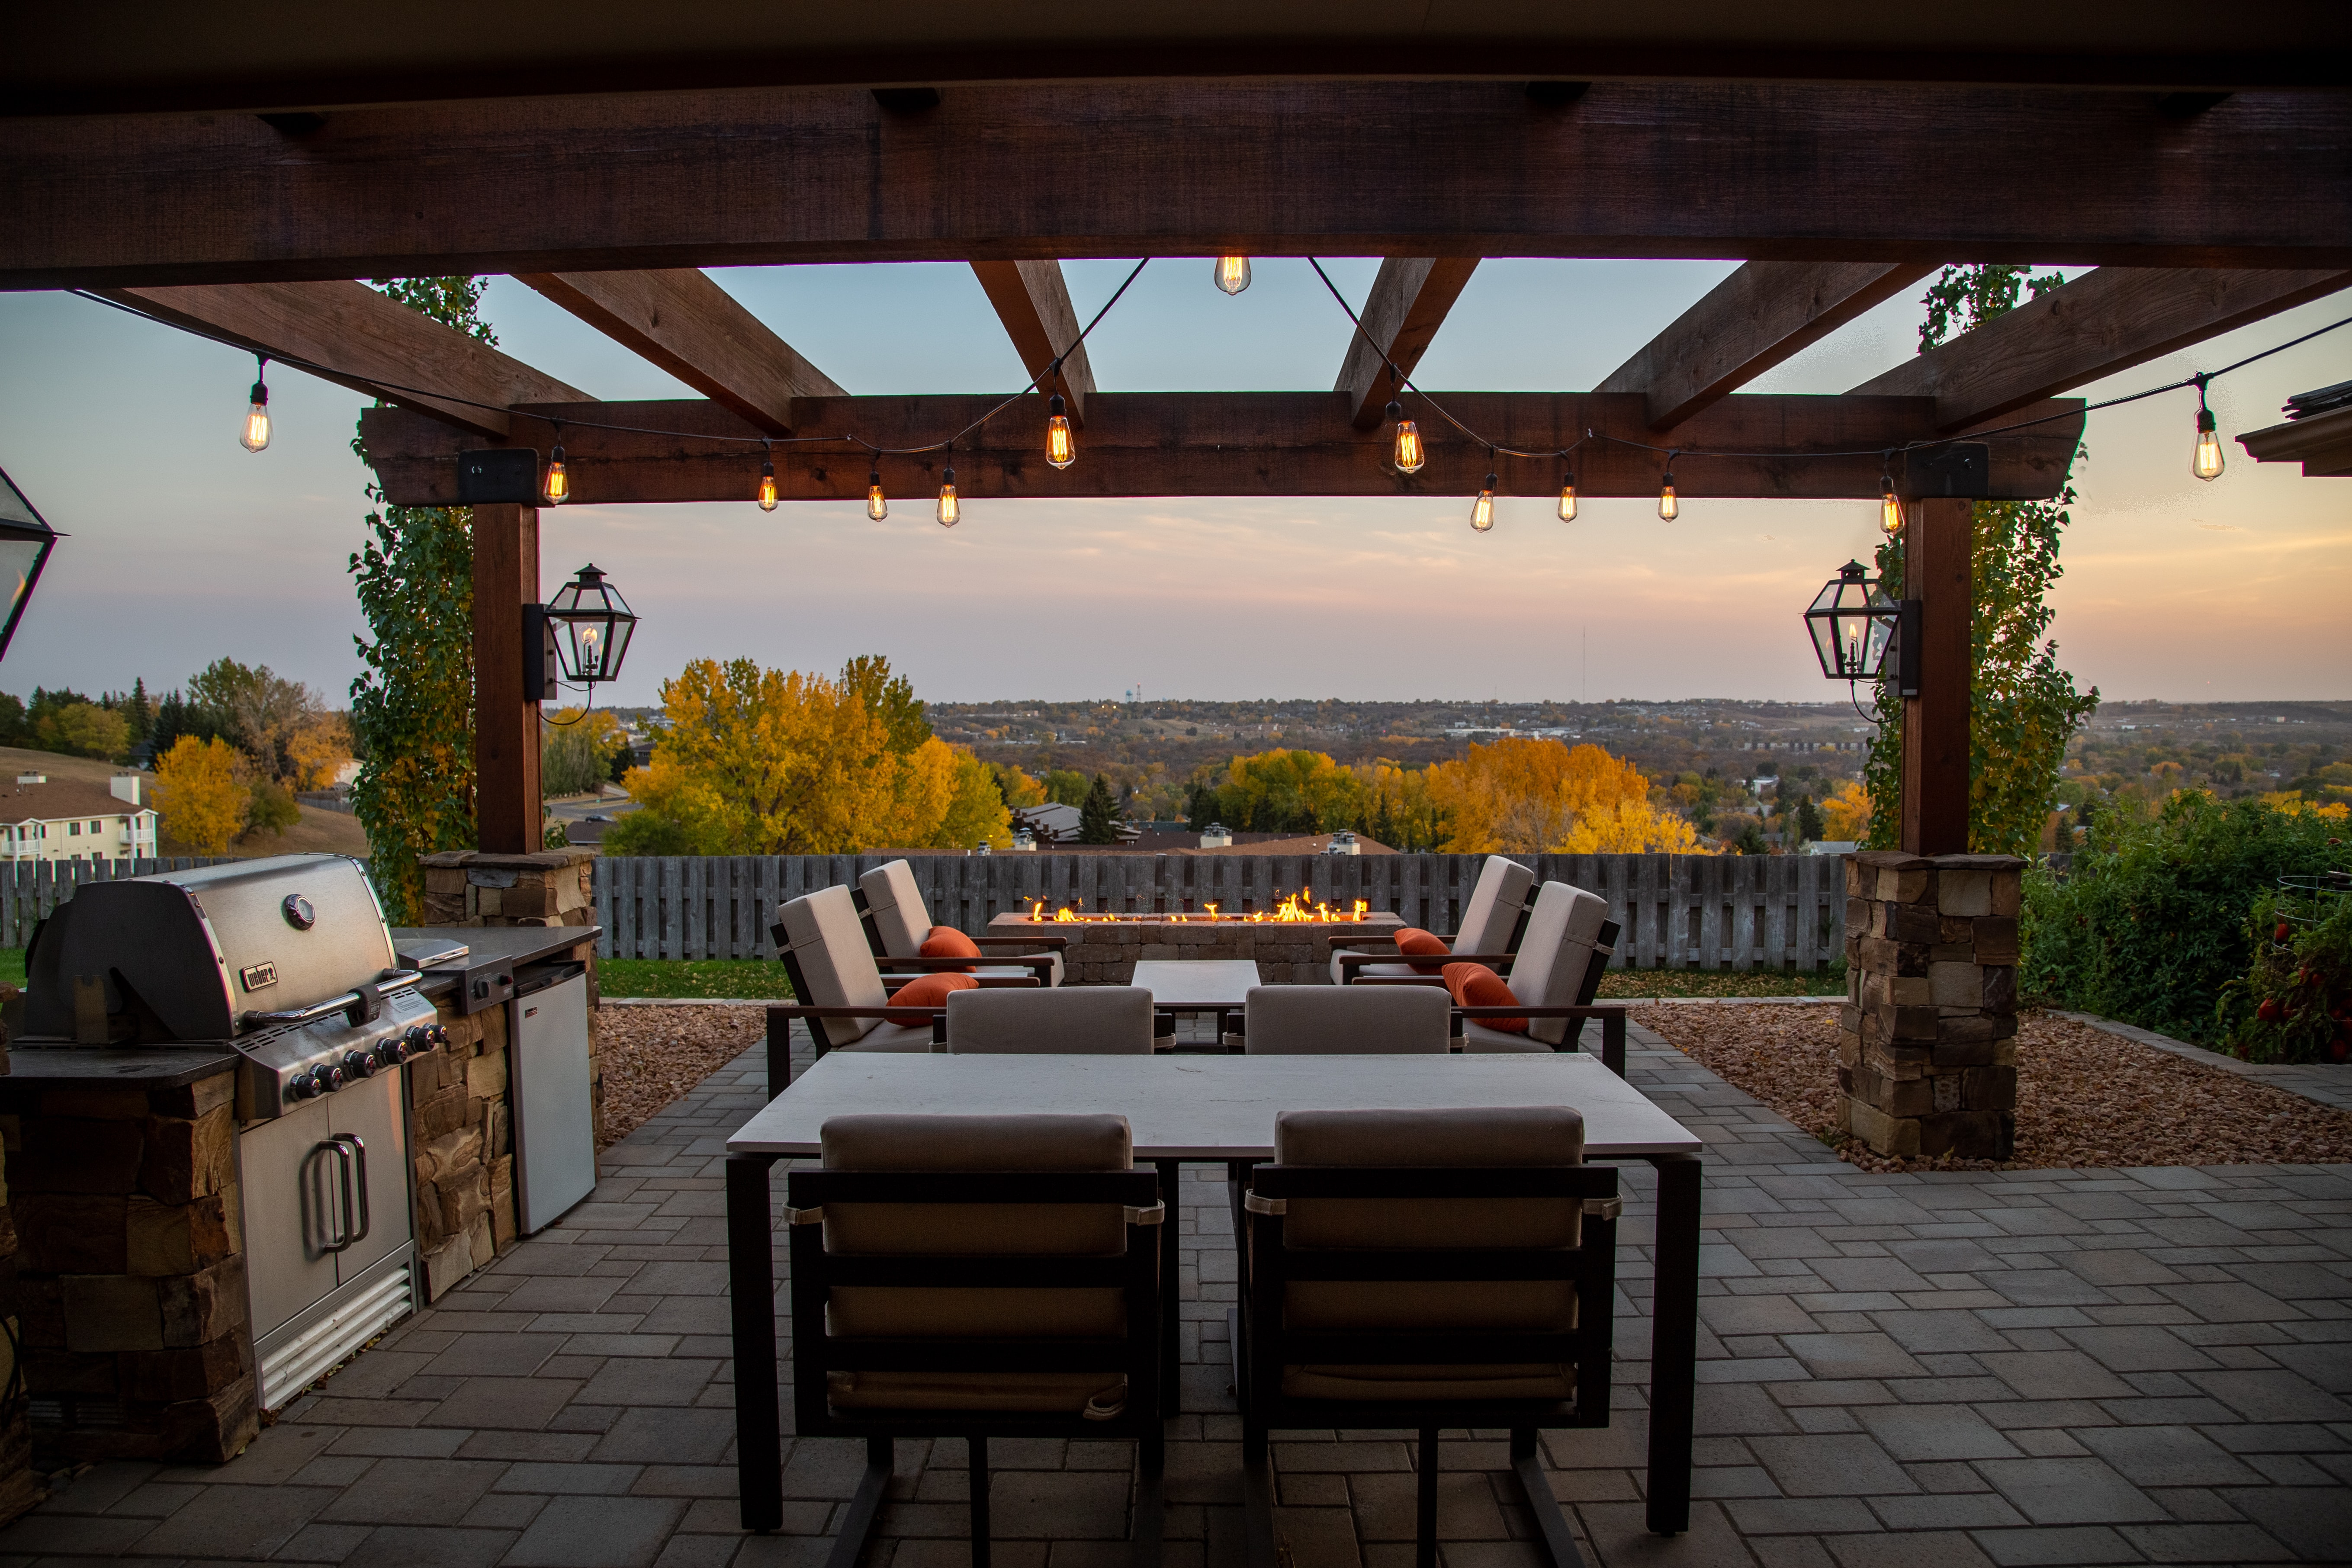 View of patio in residential yard. Pergola above outdoor dining area with string lights; a firepit in the distance.